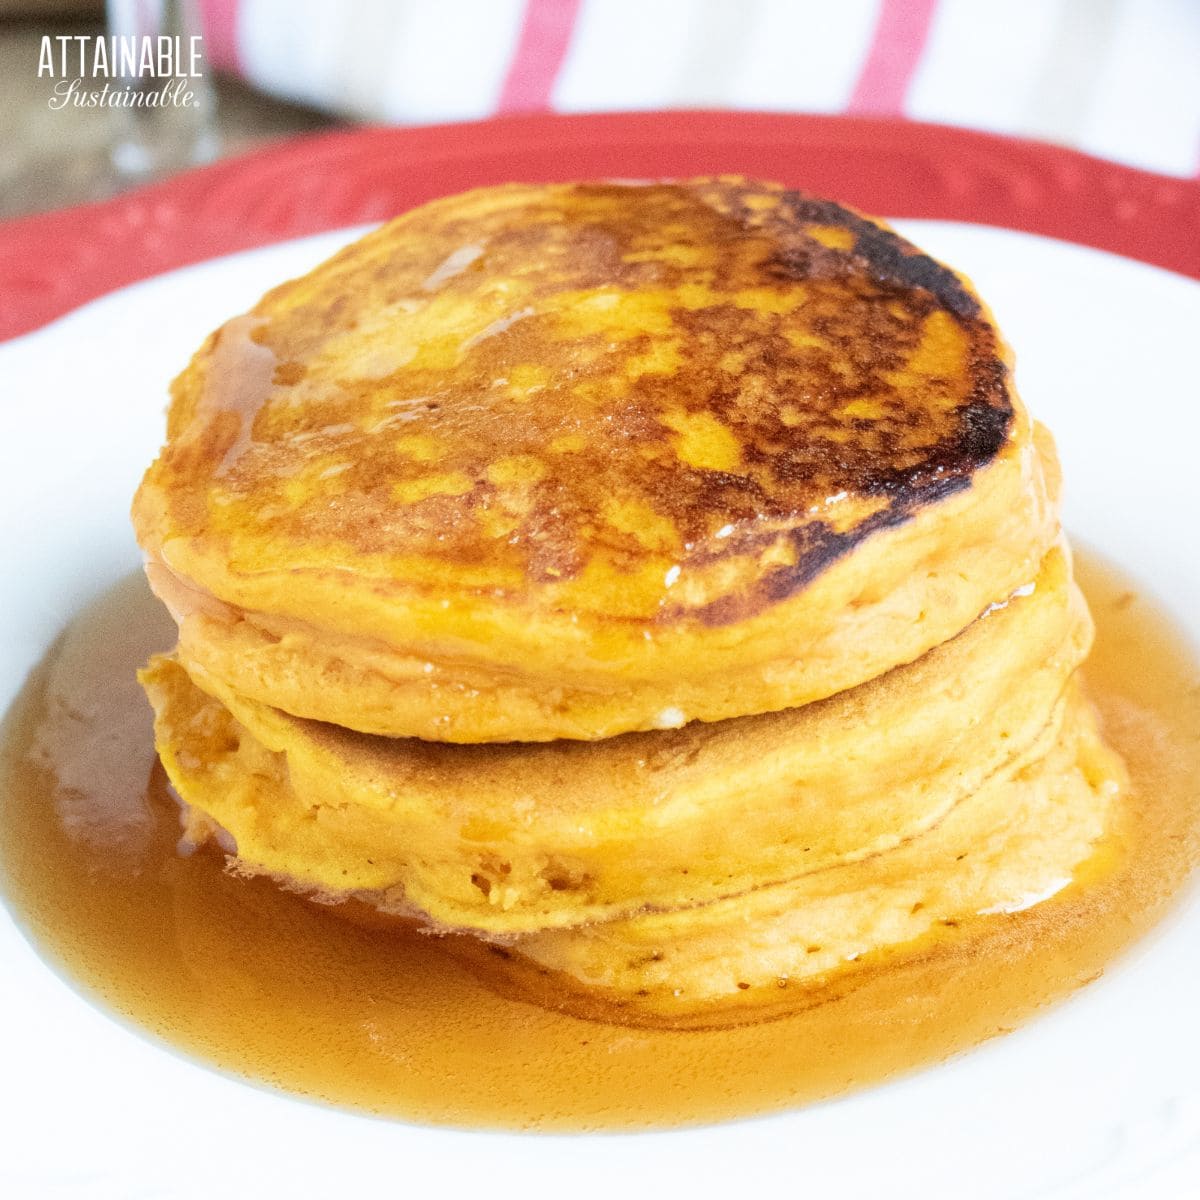 Make these Persimmon Pancakes for Fall Flavor